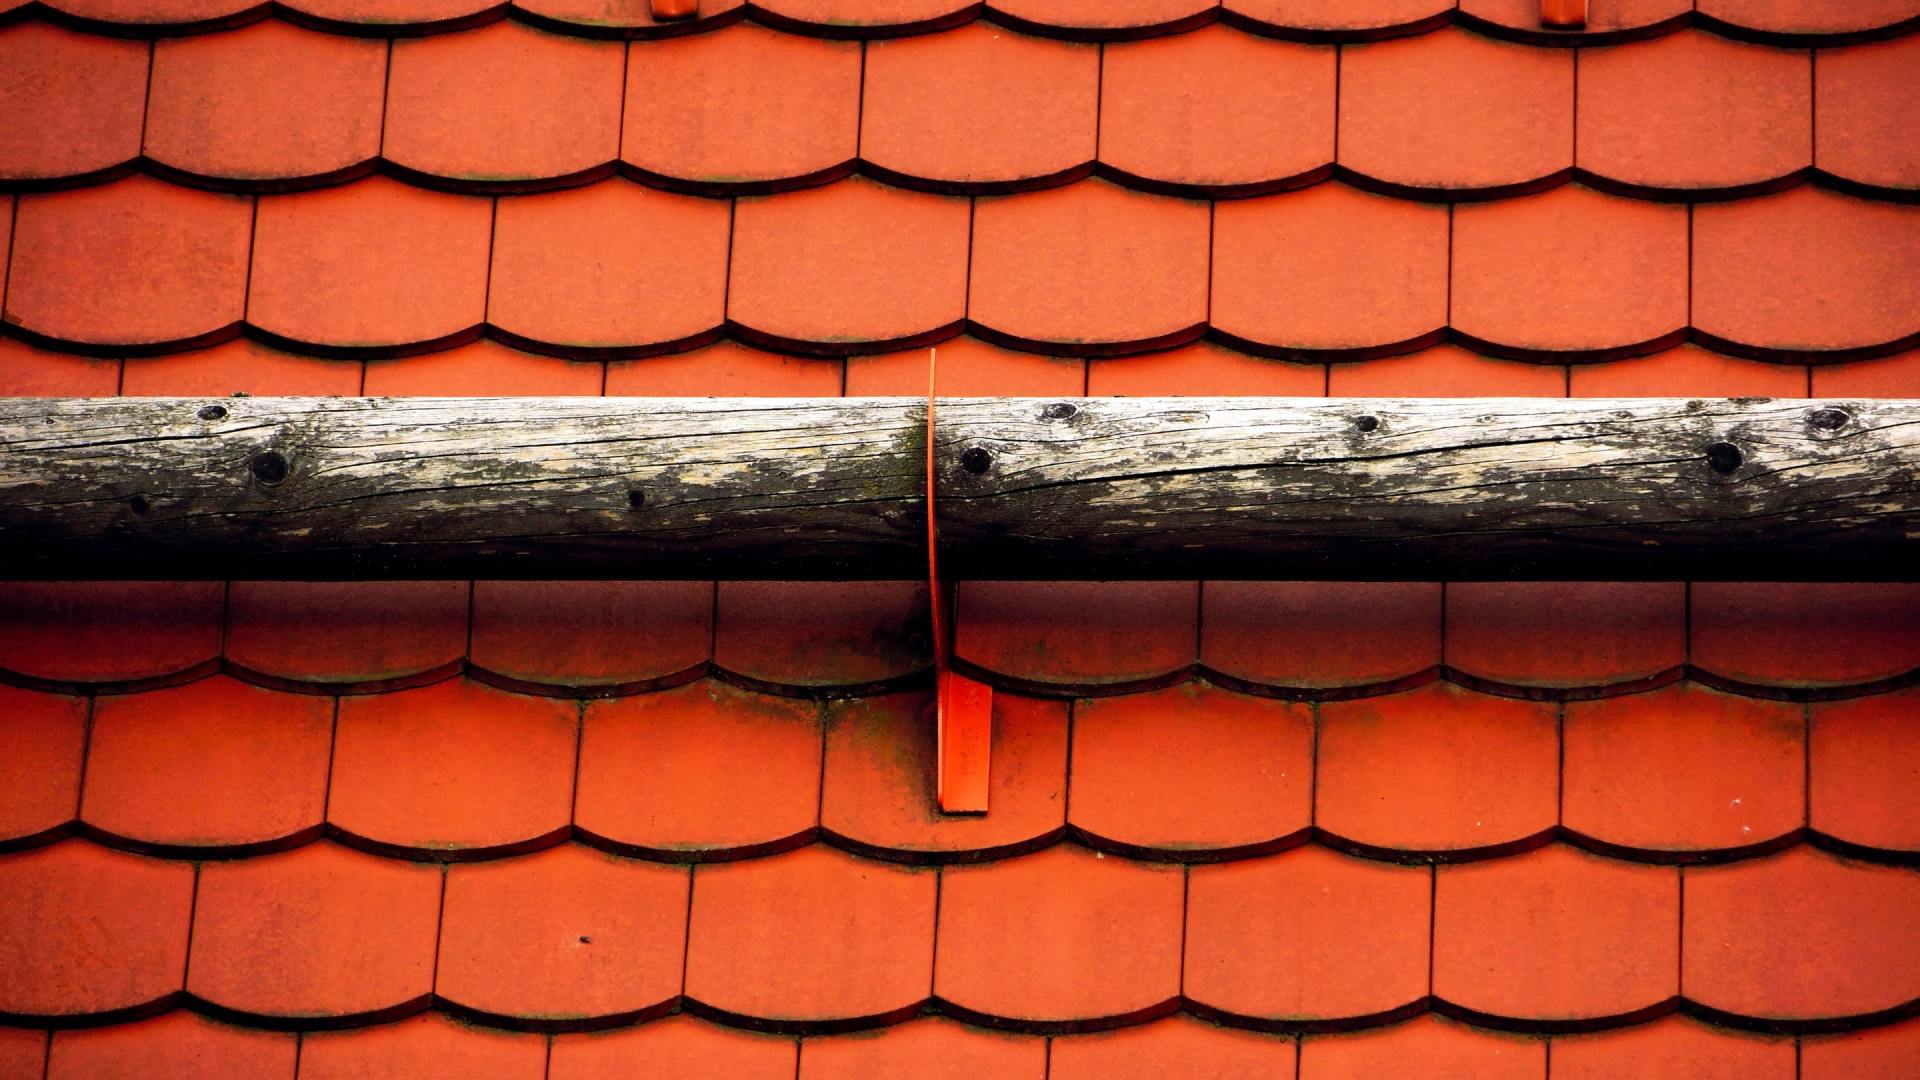 a close up of a roof with red tiles and a wooden gutter .